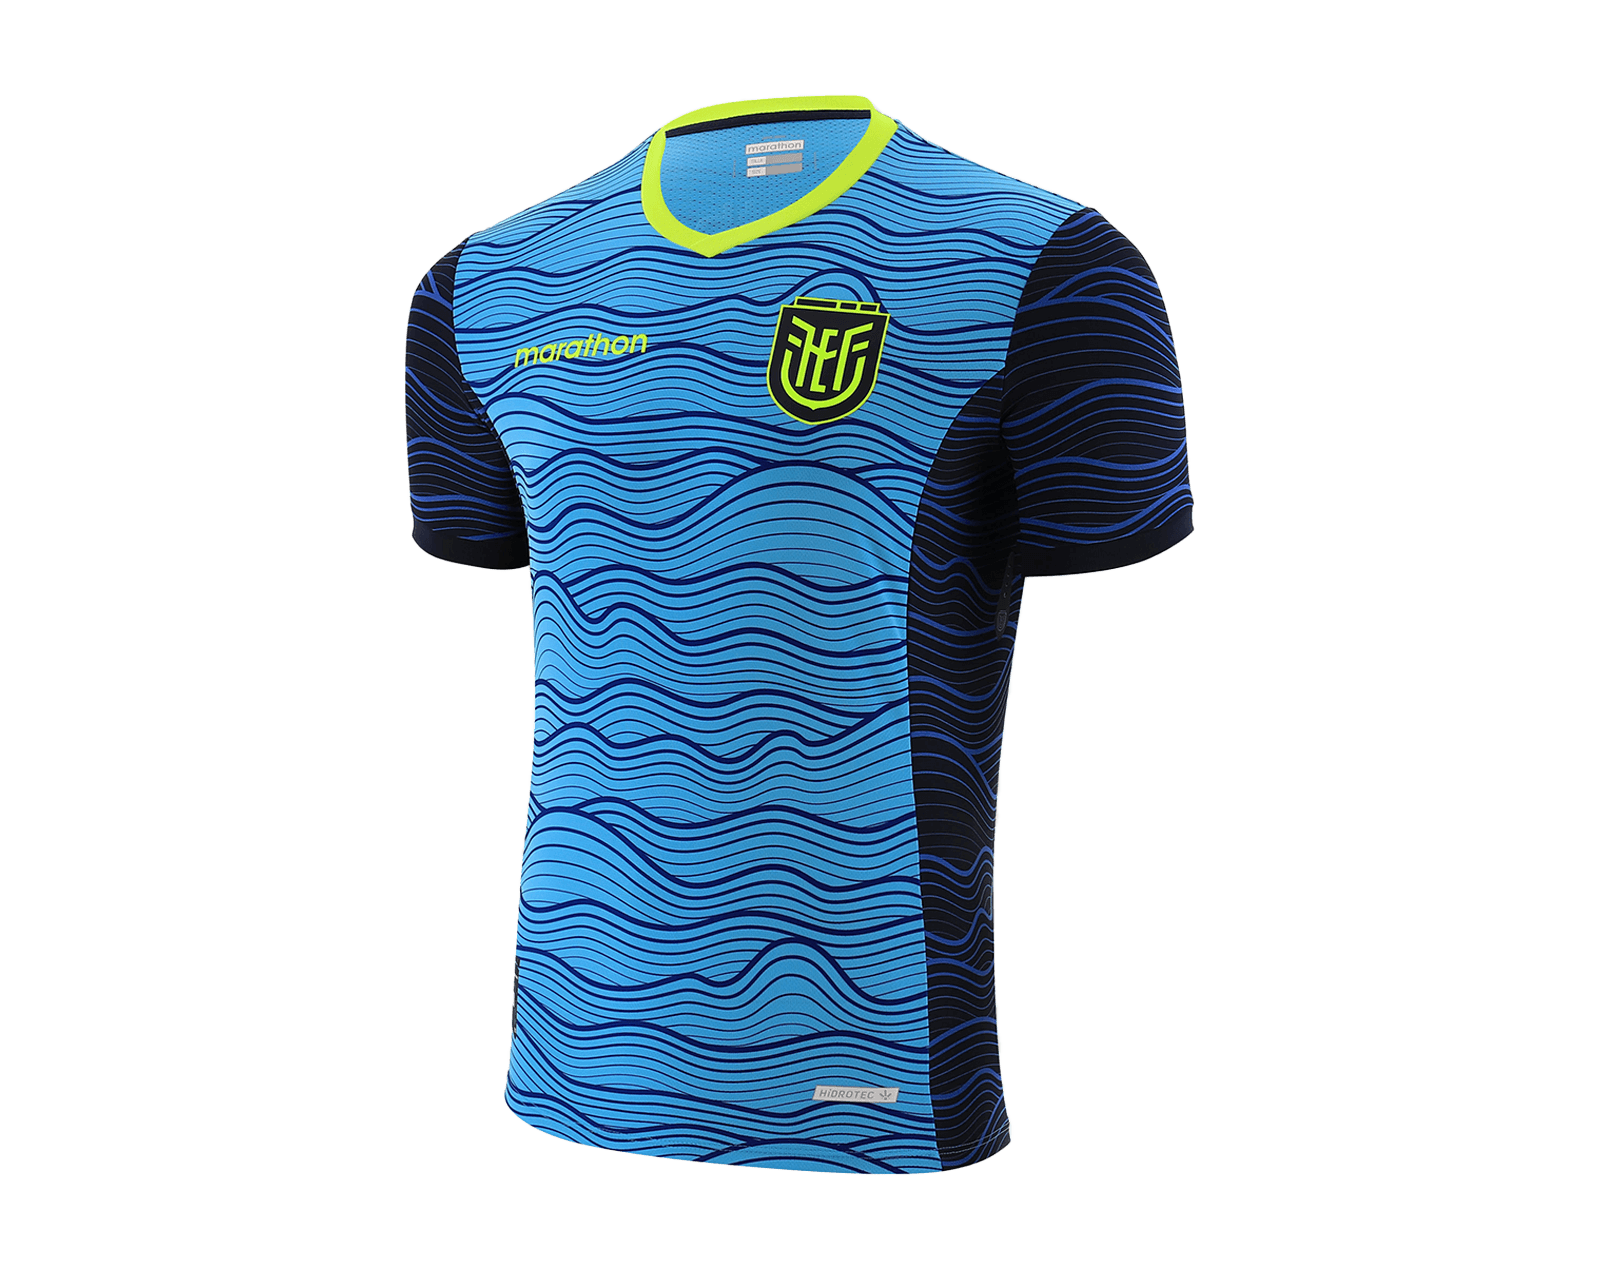 A jersey with waves design